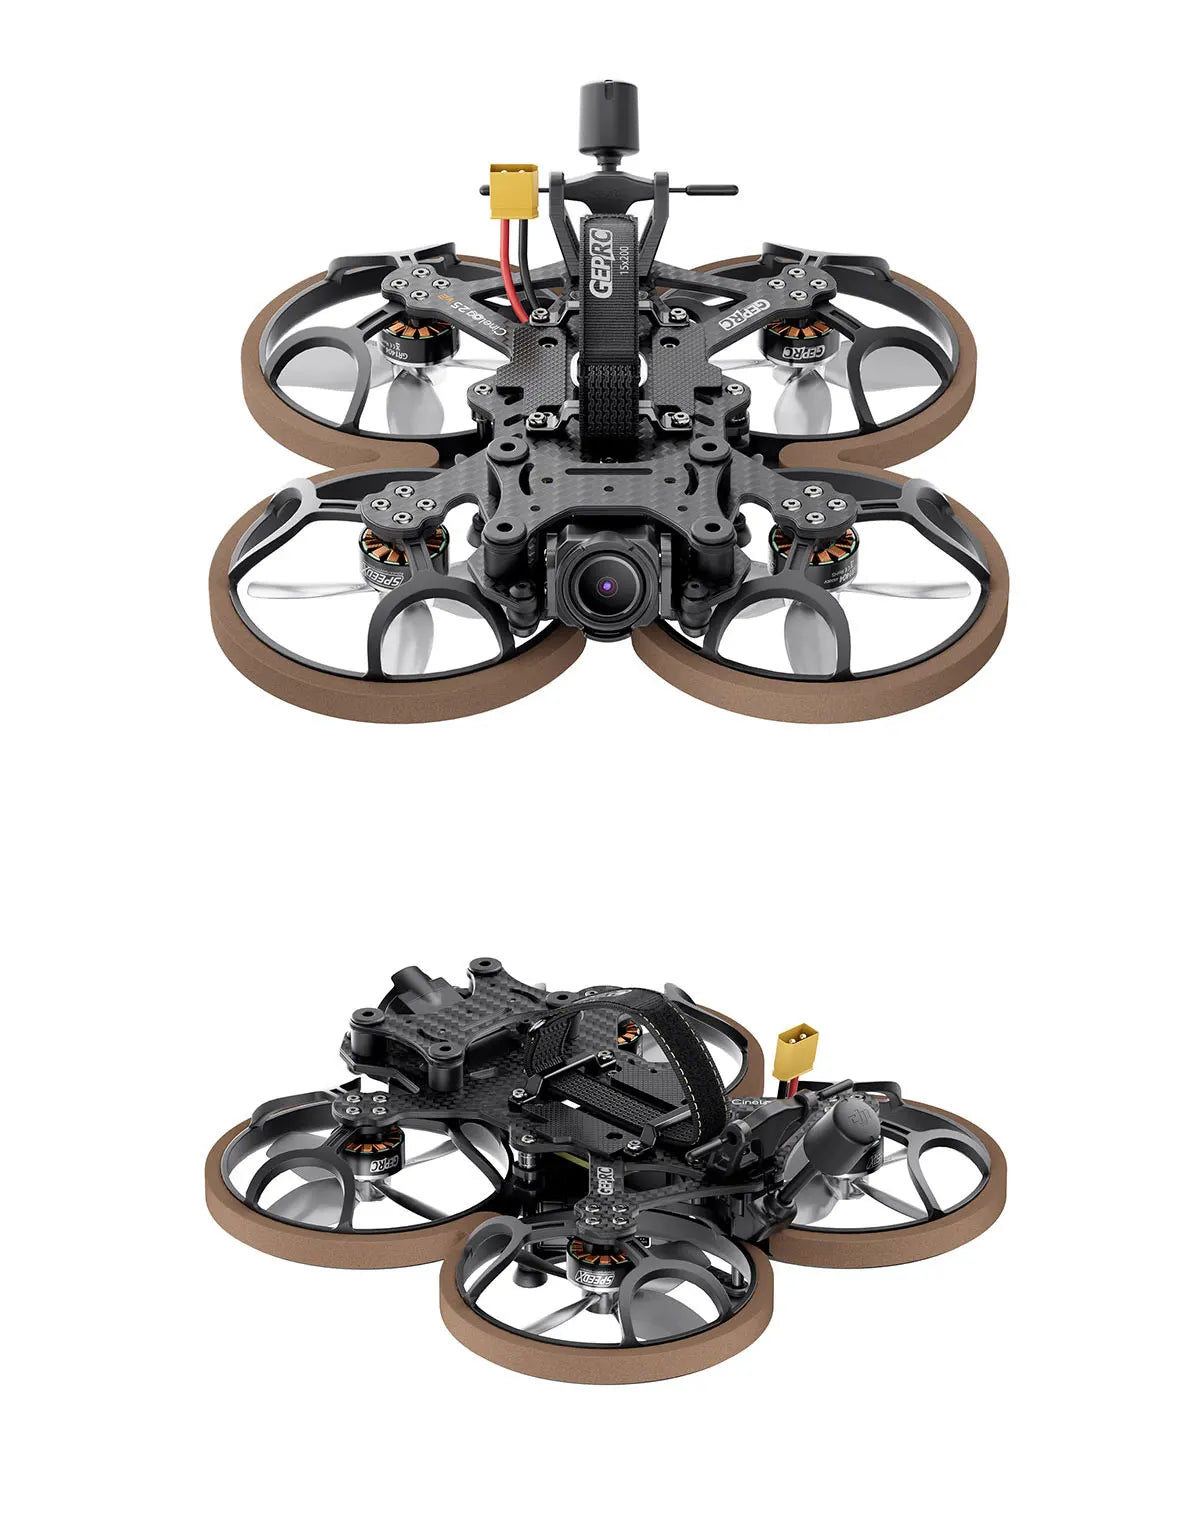 GEPRC Cinelog25 V2 HD O3 FPV, it is redesigned to be fixed with aluminum parts and cable ties, which is convenient